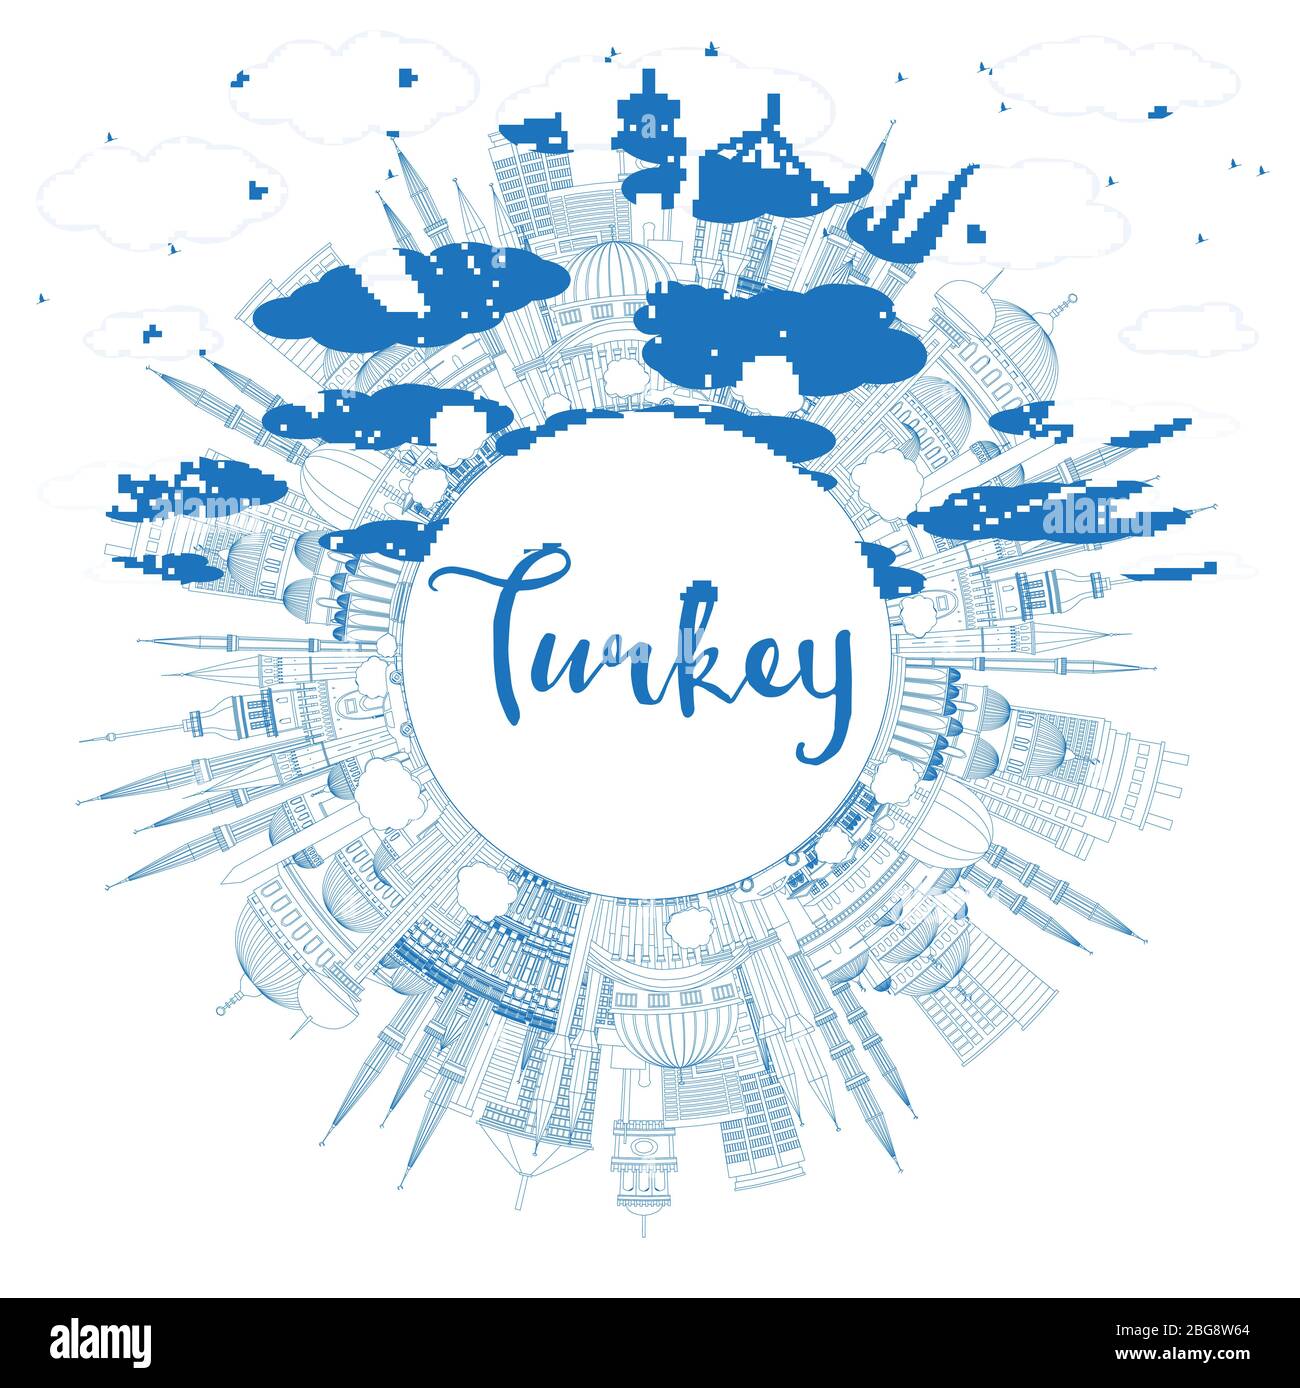 Outline Turkey City Skyline with Blue Buildings and Copy Space. Vector Illustration. Tourism Concept with Historic Architecture. Stock Vector